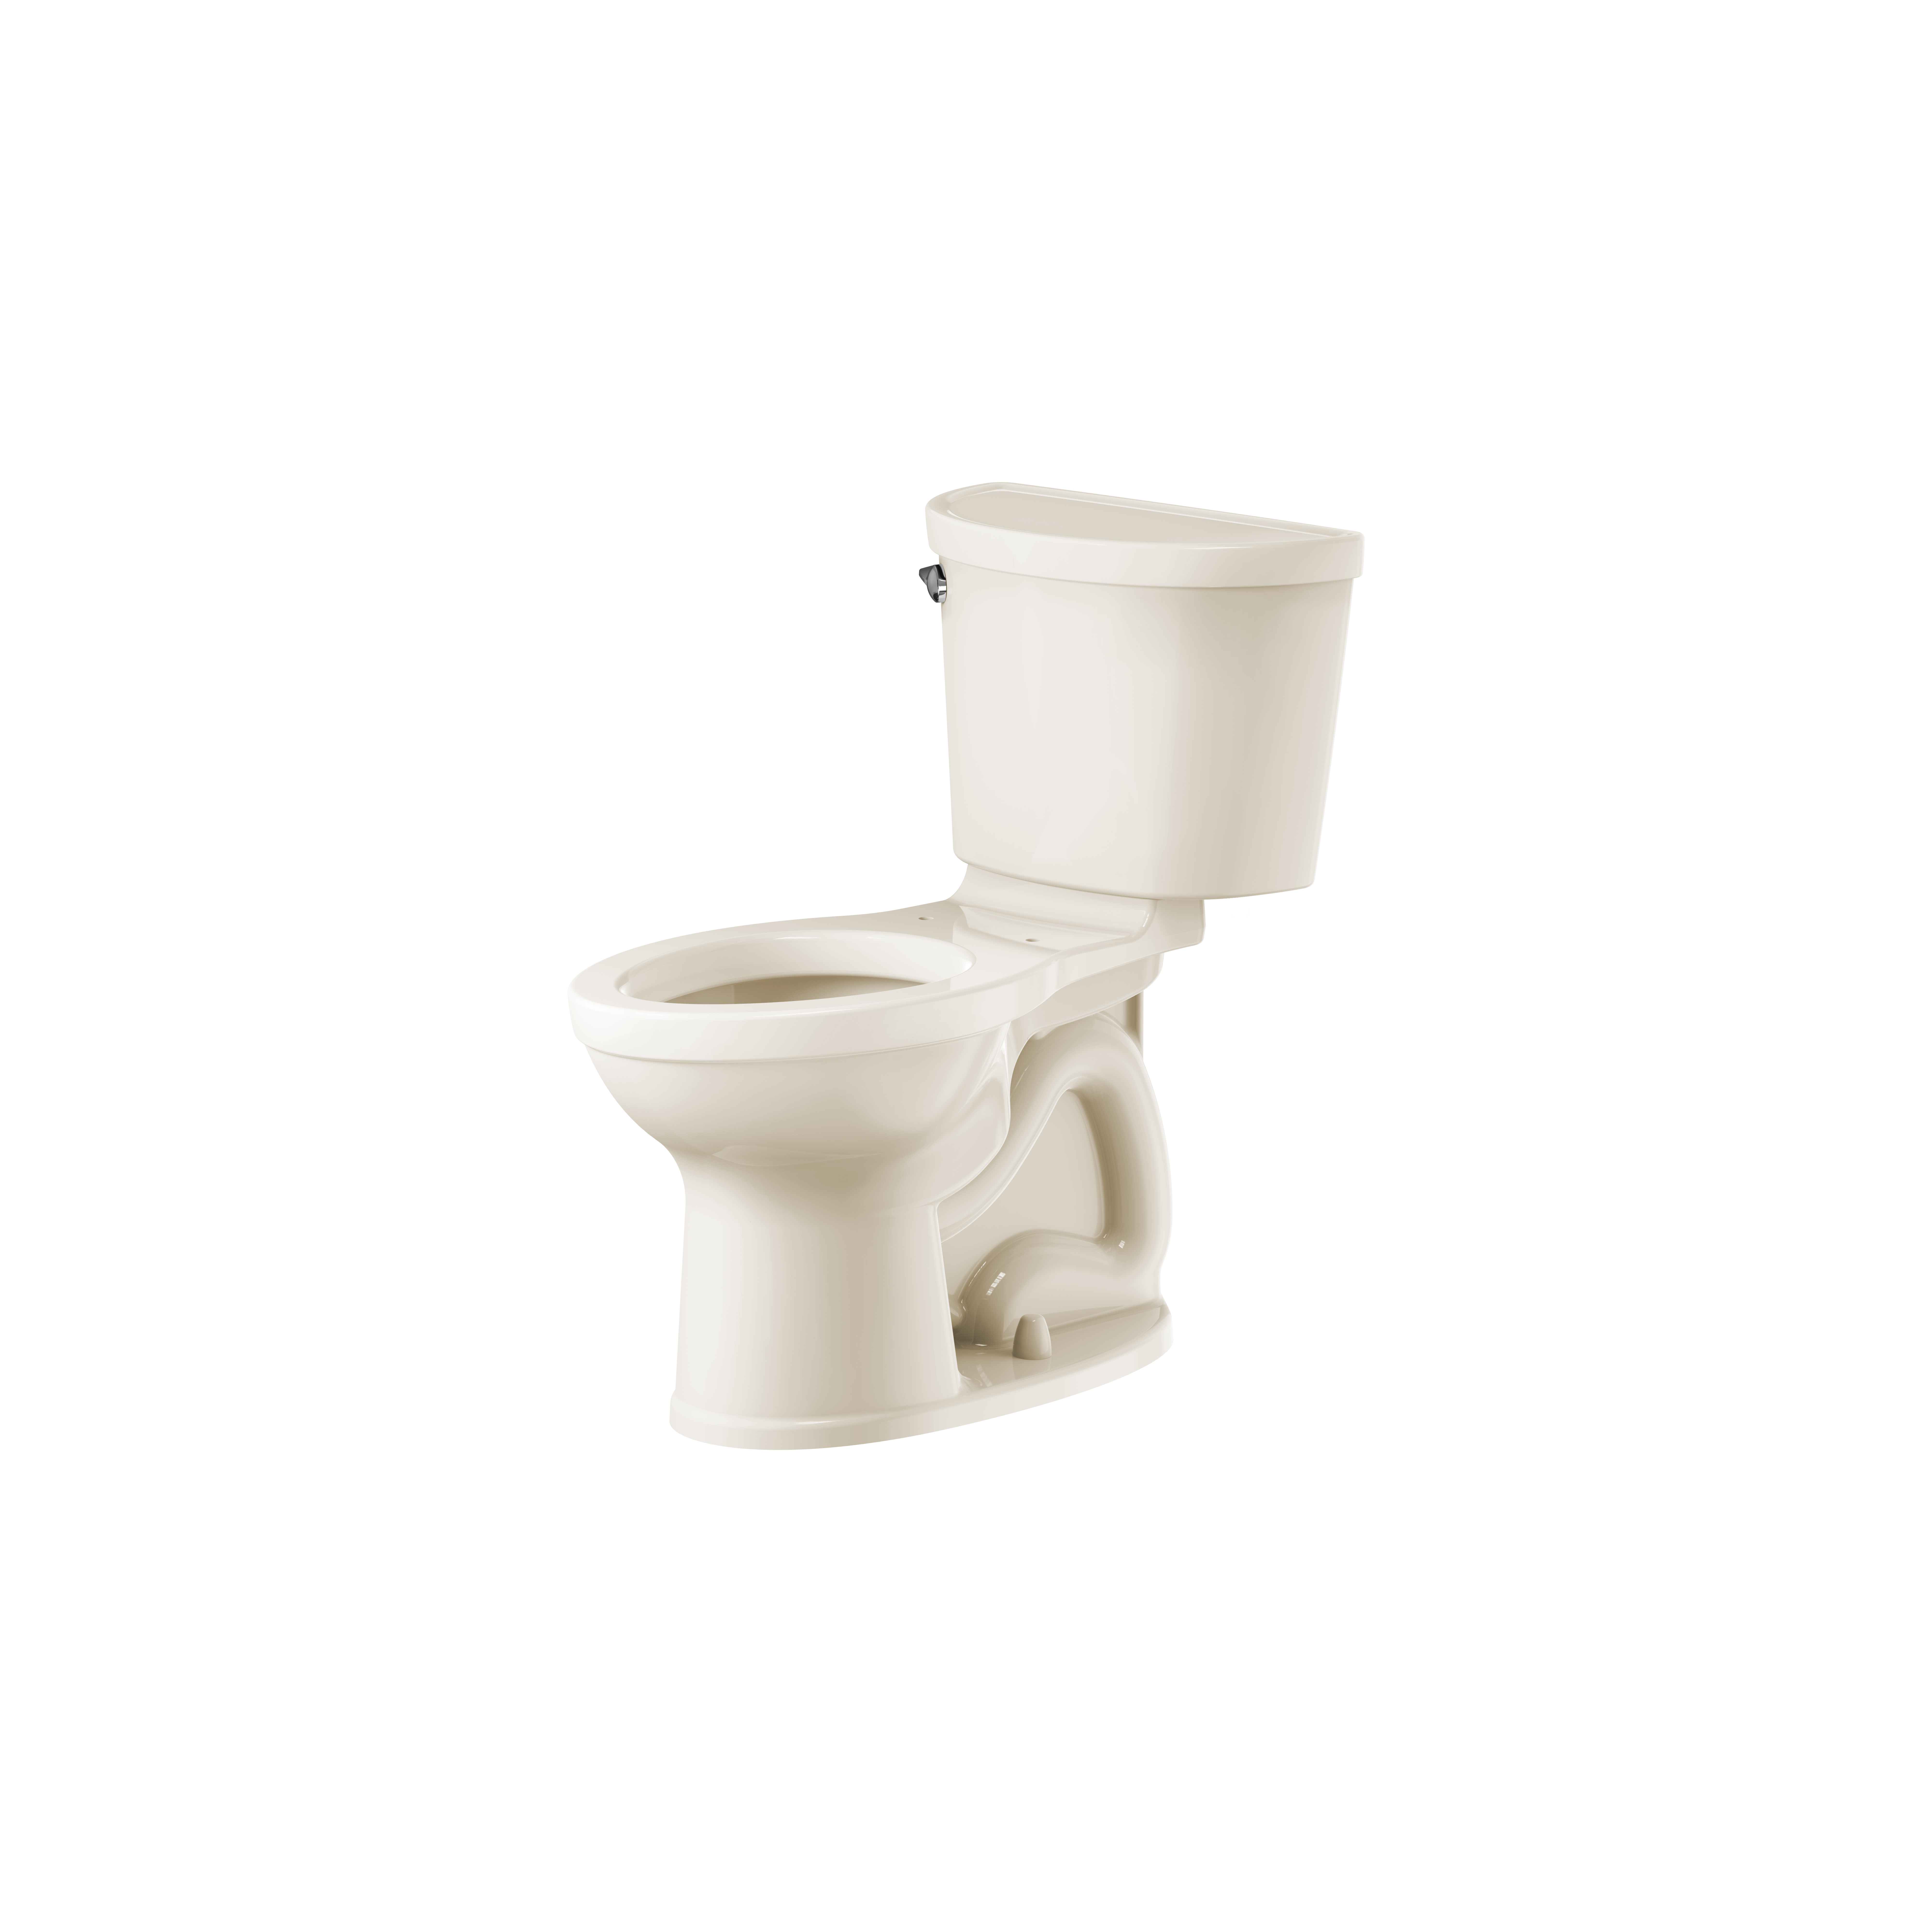 Champion® PRO Two-Piece 1.28 gpf/4.8 Lpf Chair Height Elongated Toilet Less Seat